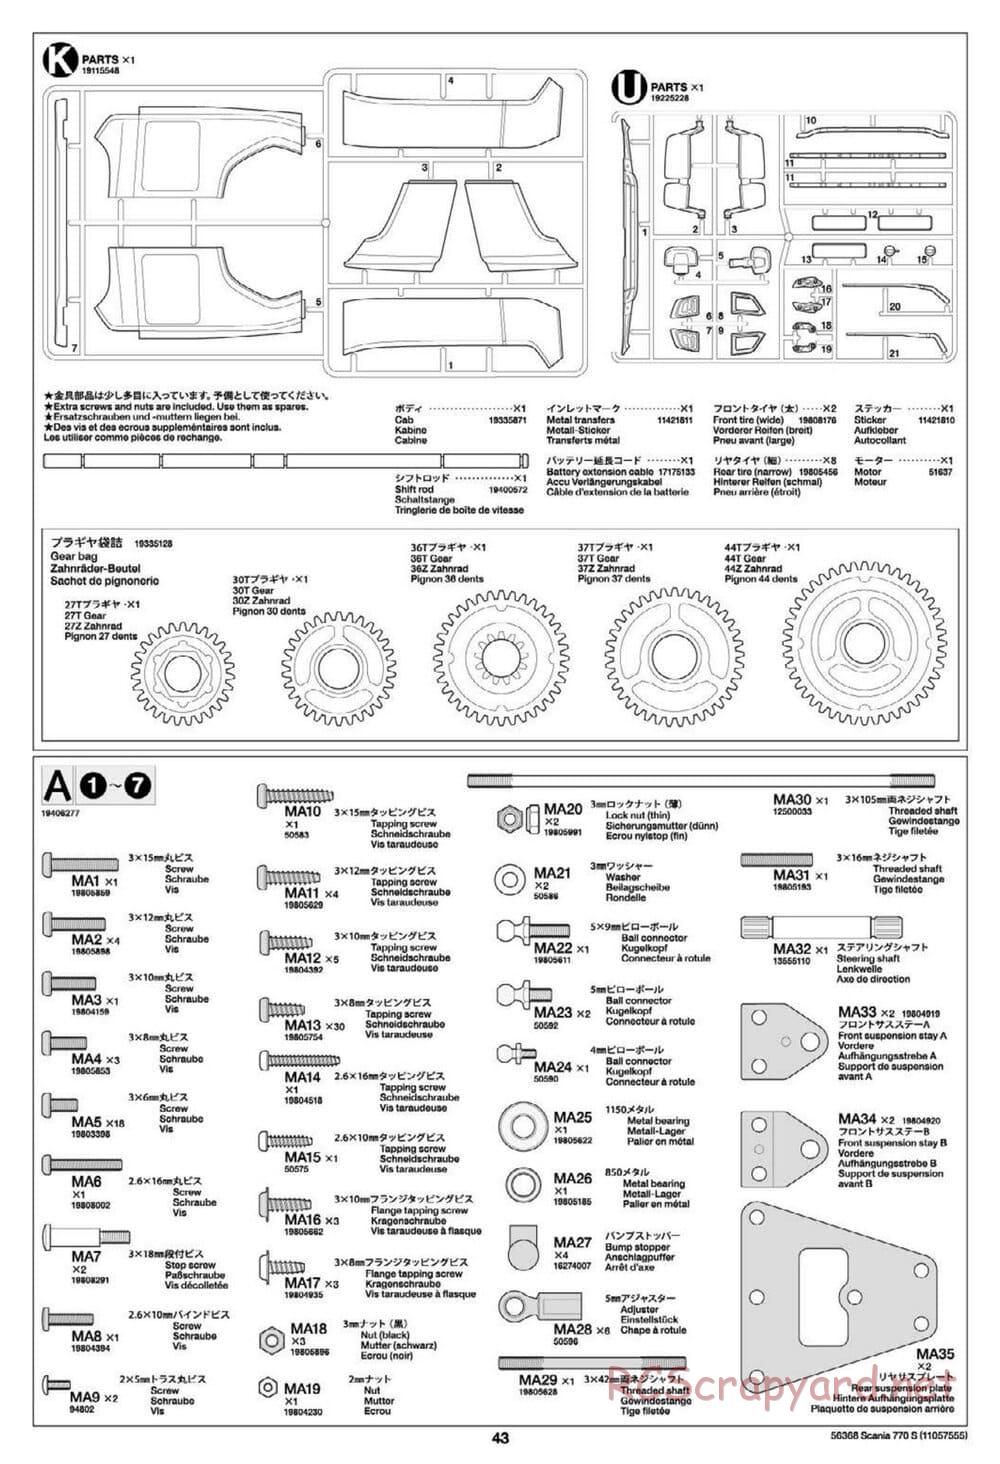 Tamiya - Scania 770S 6x4 Tractor Truck Chassis - Manual - Page 43